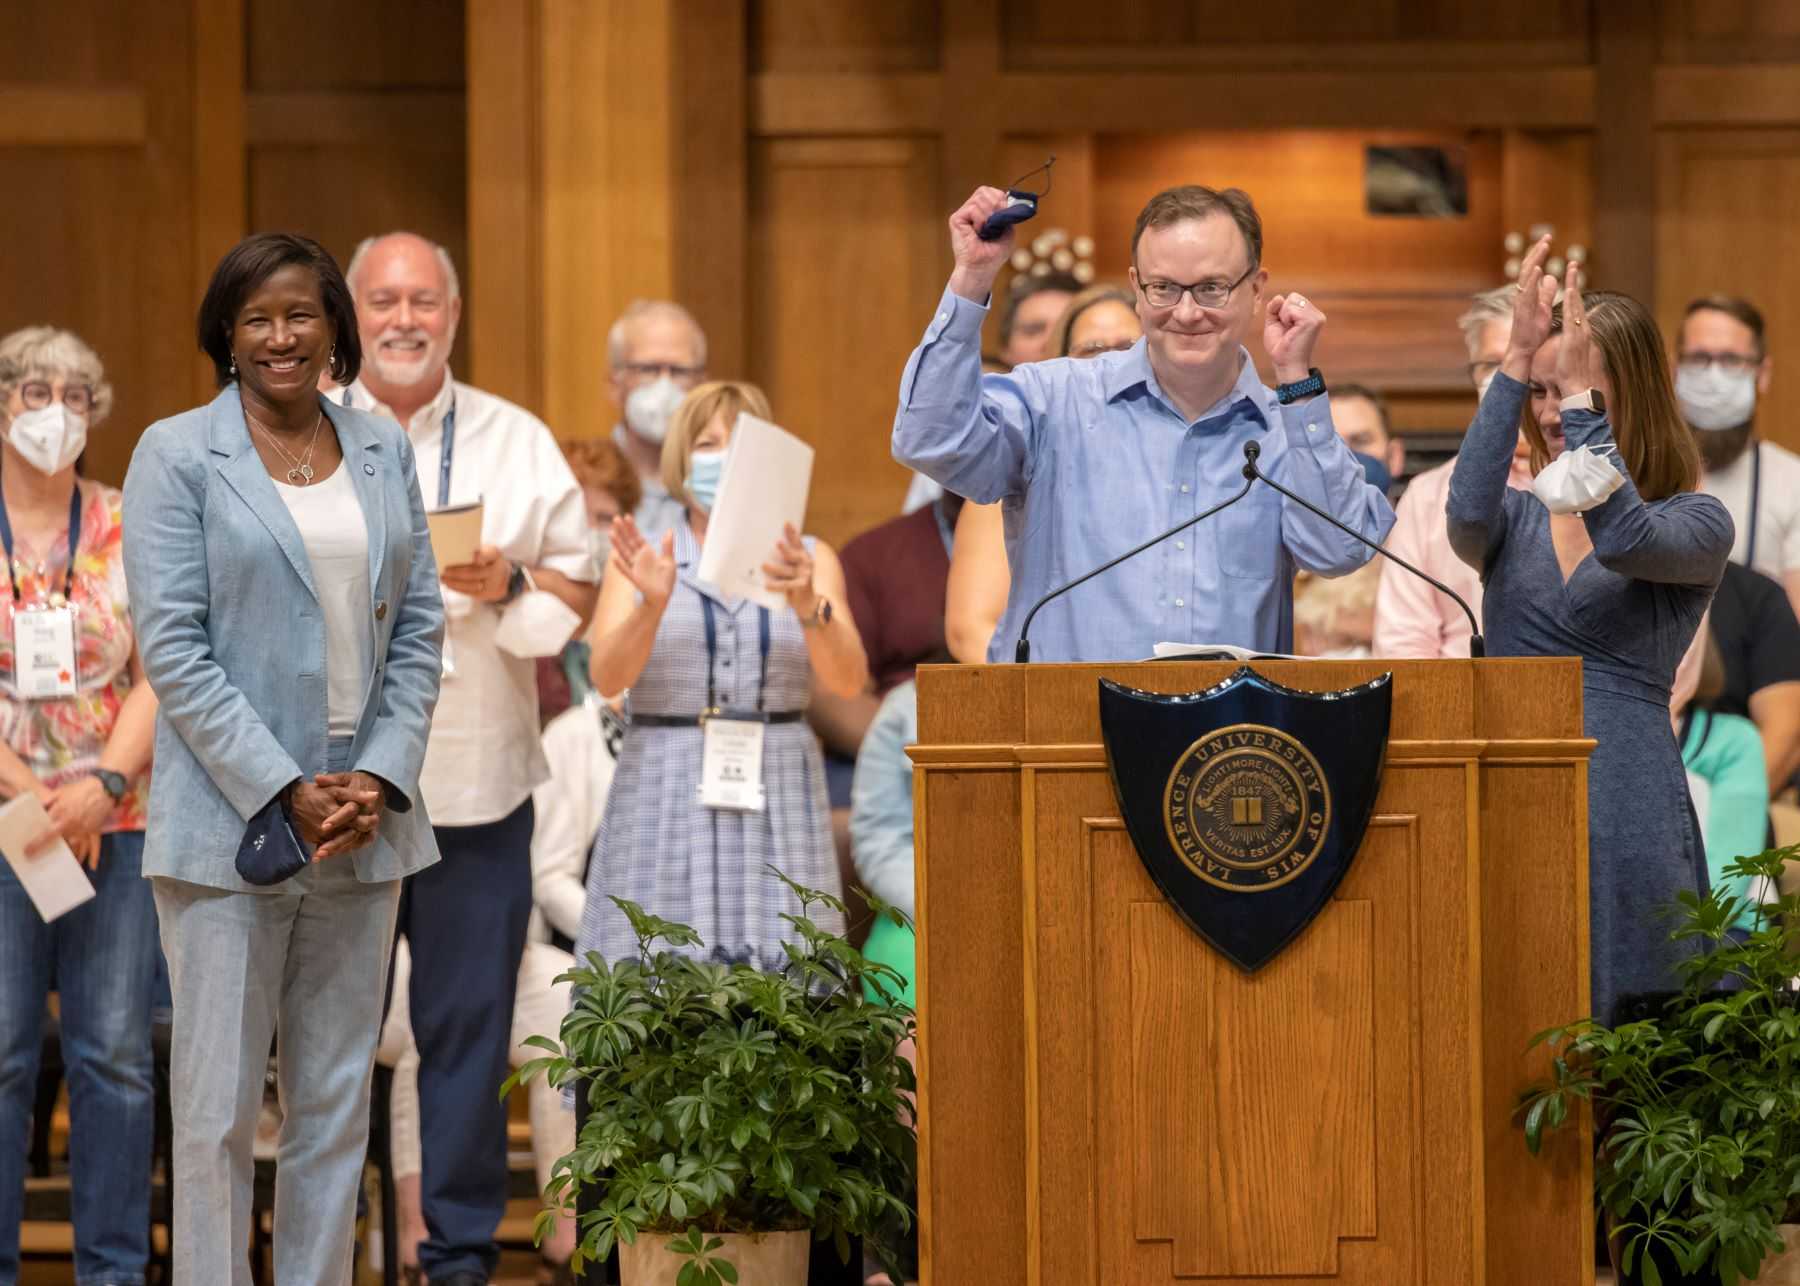 David Bauman pumps his fist at the podium as he presents the class gift while President Laurie Carter and other alumni look on on the stage of Memorial Chapel.